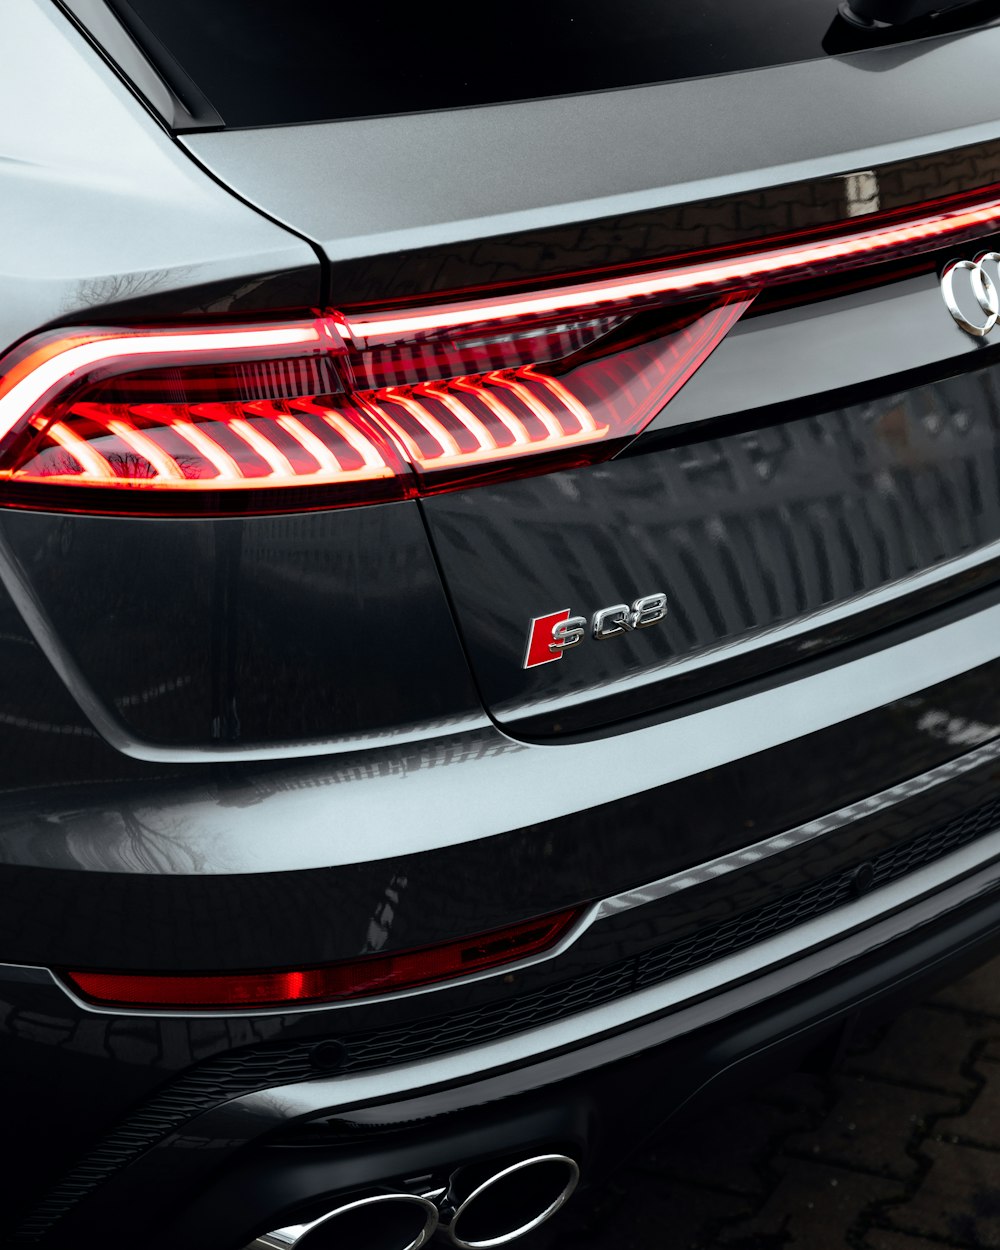 Black and red car tail light photo – Free Car Image on Unsplash